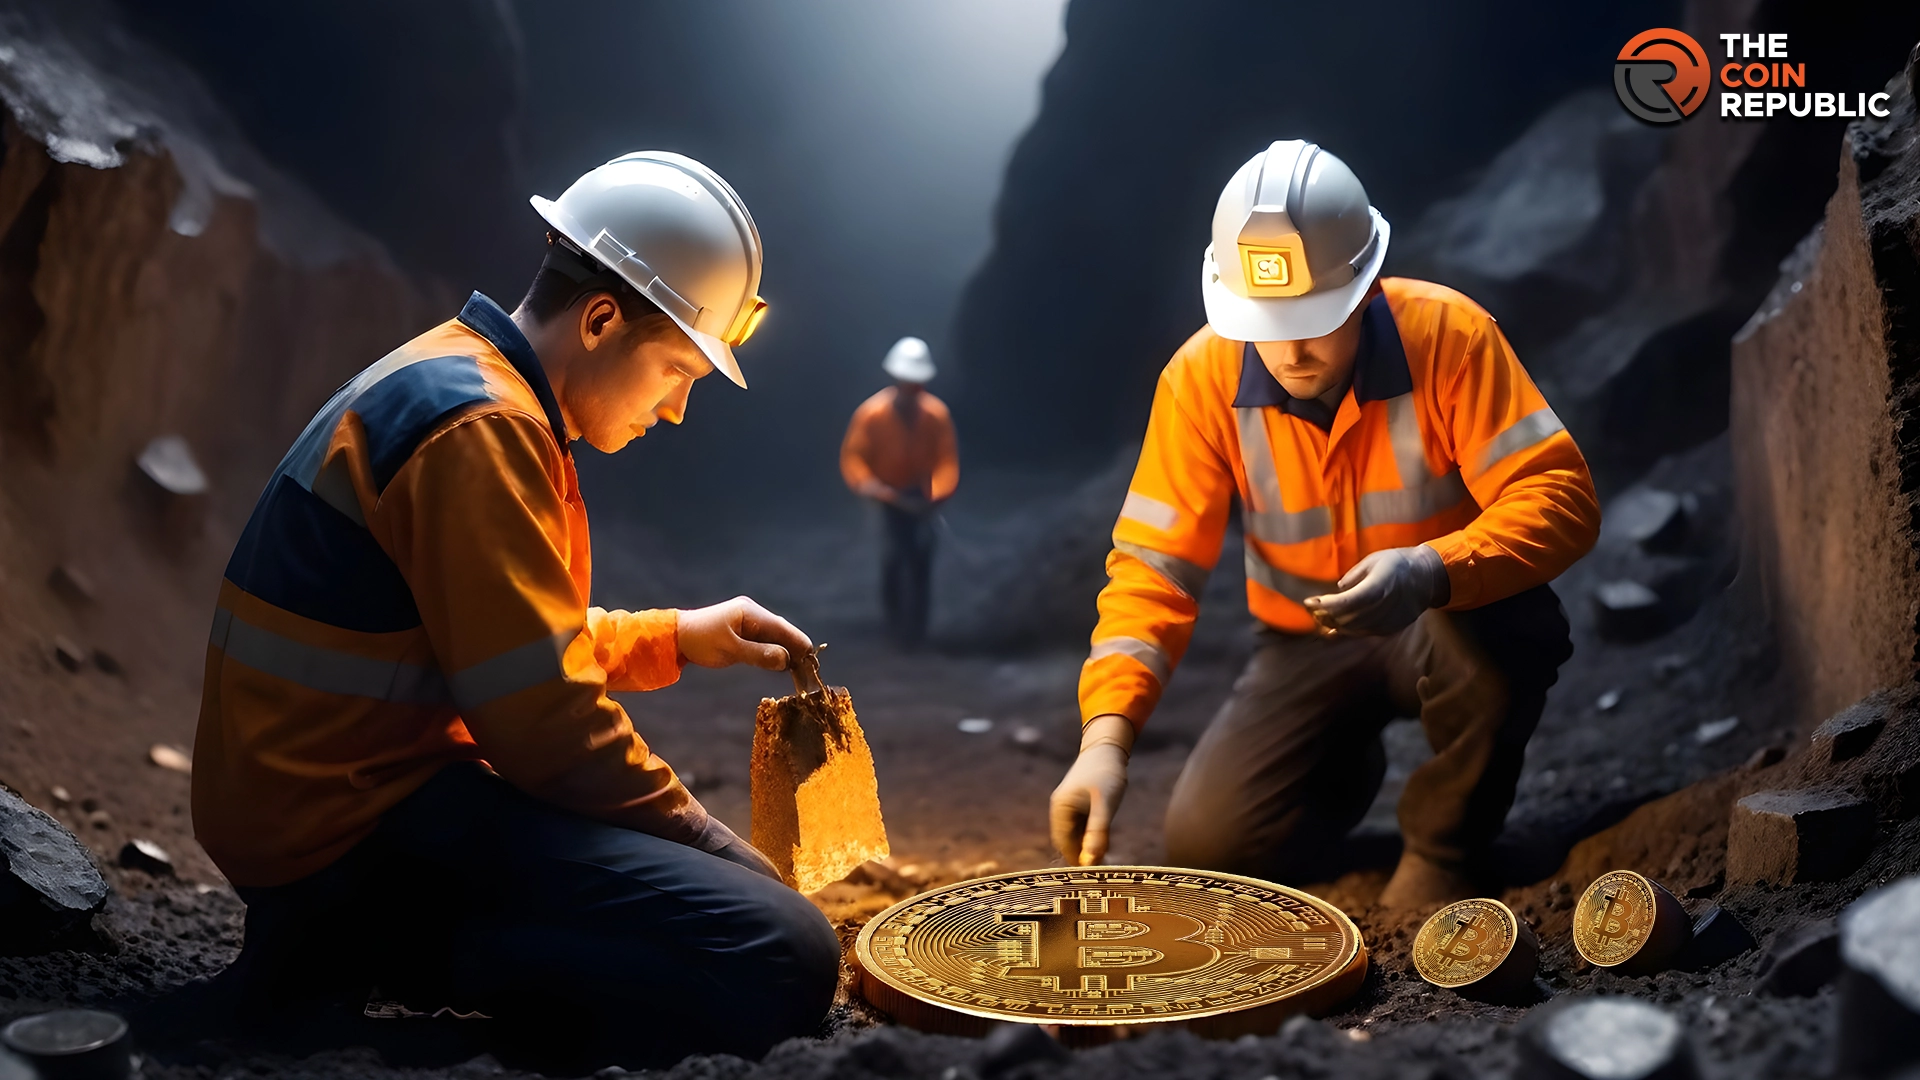 Post-Halving, Bitcoin Miners’ Revenue Has Reduced Significantly